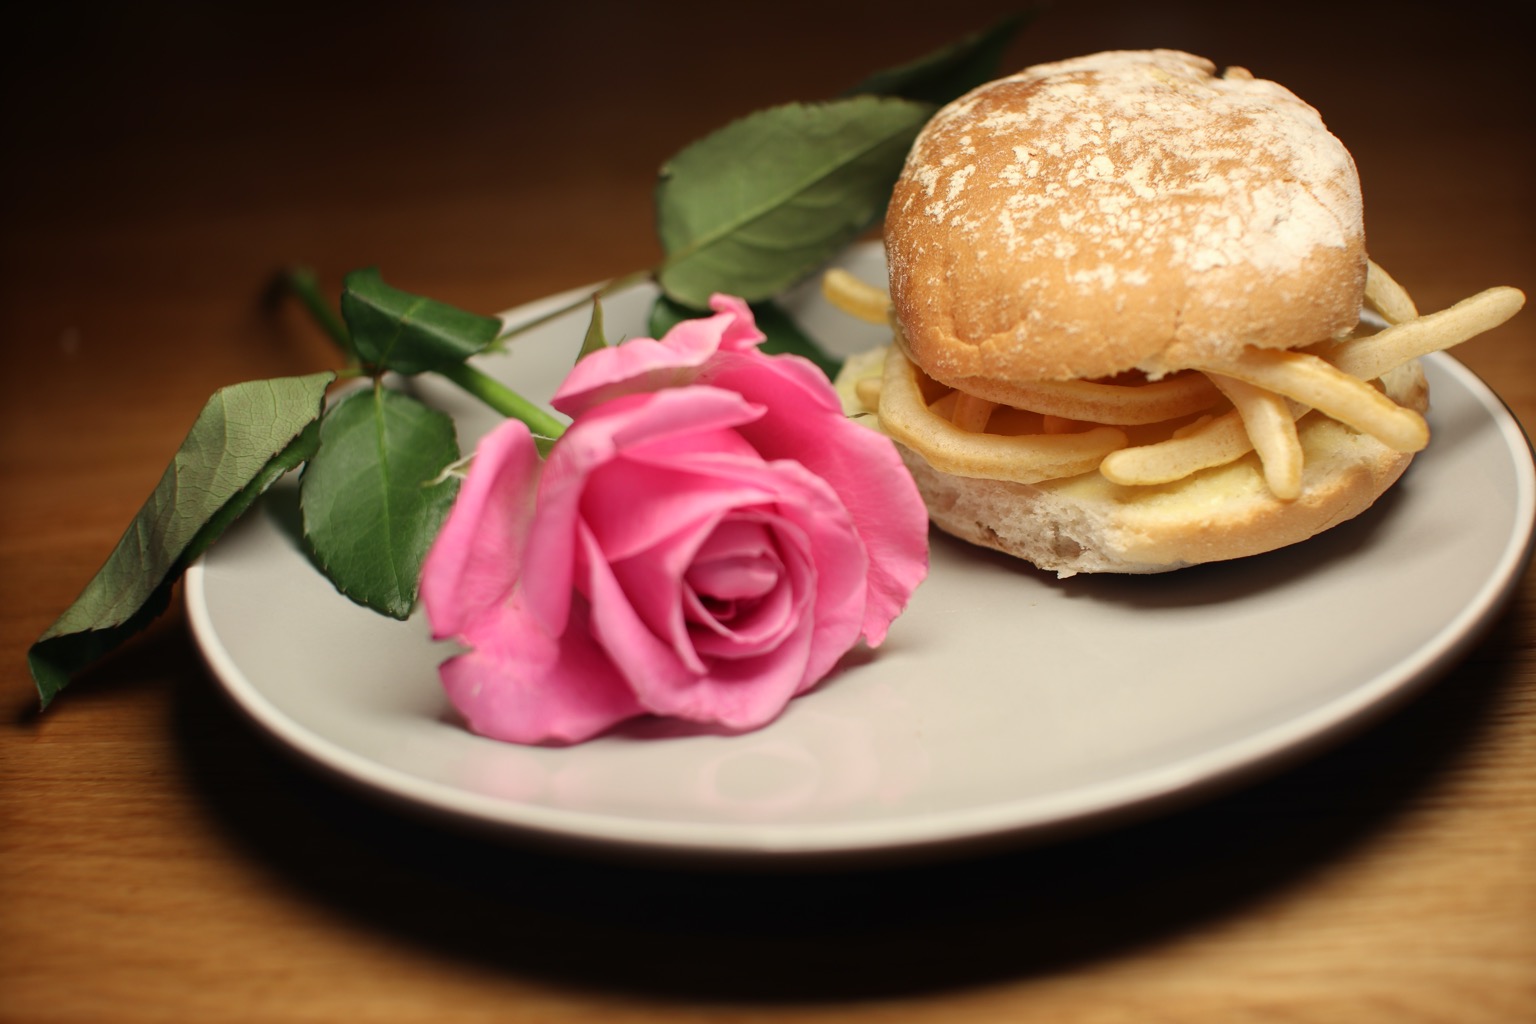 Roll containing French Fries alongside a pink rose